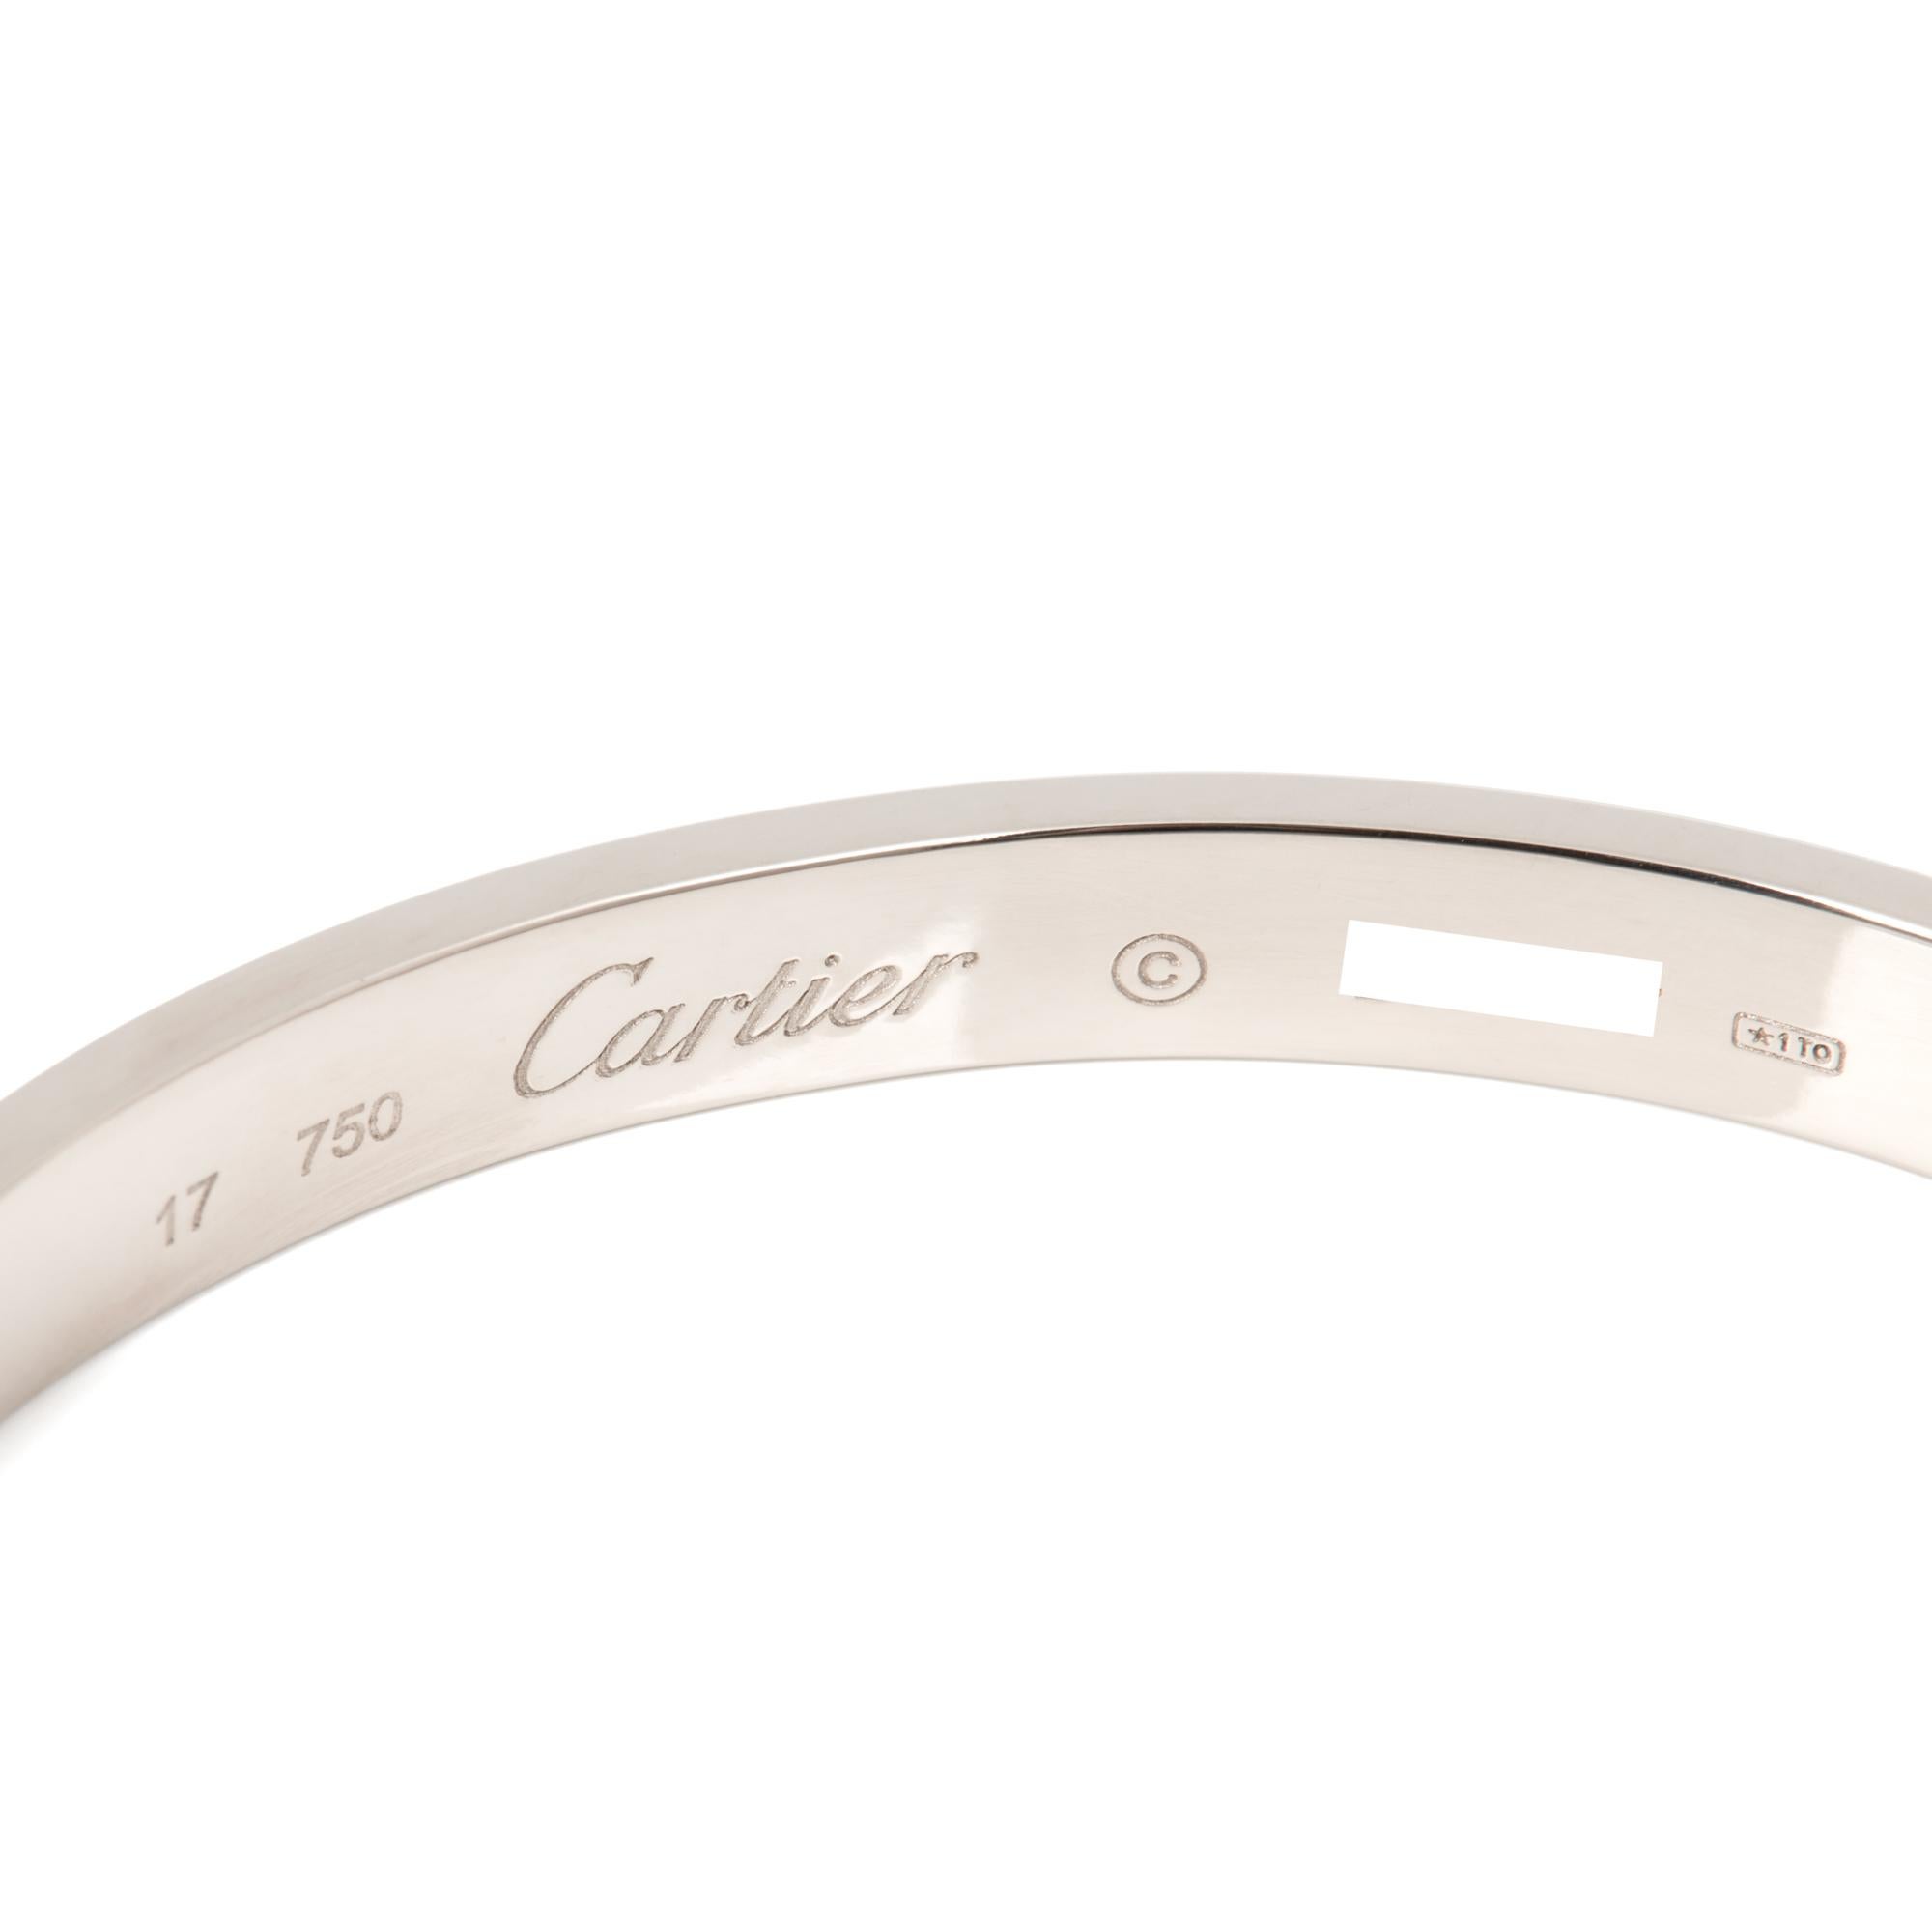 This bangle by Cartier is from their Love Collection and features the iconic screw details with the original style screw fastening. Accompanied by a Cartier Box, Certificate and Screwdriver. Our Xupes reference is J918 should you need to quote